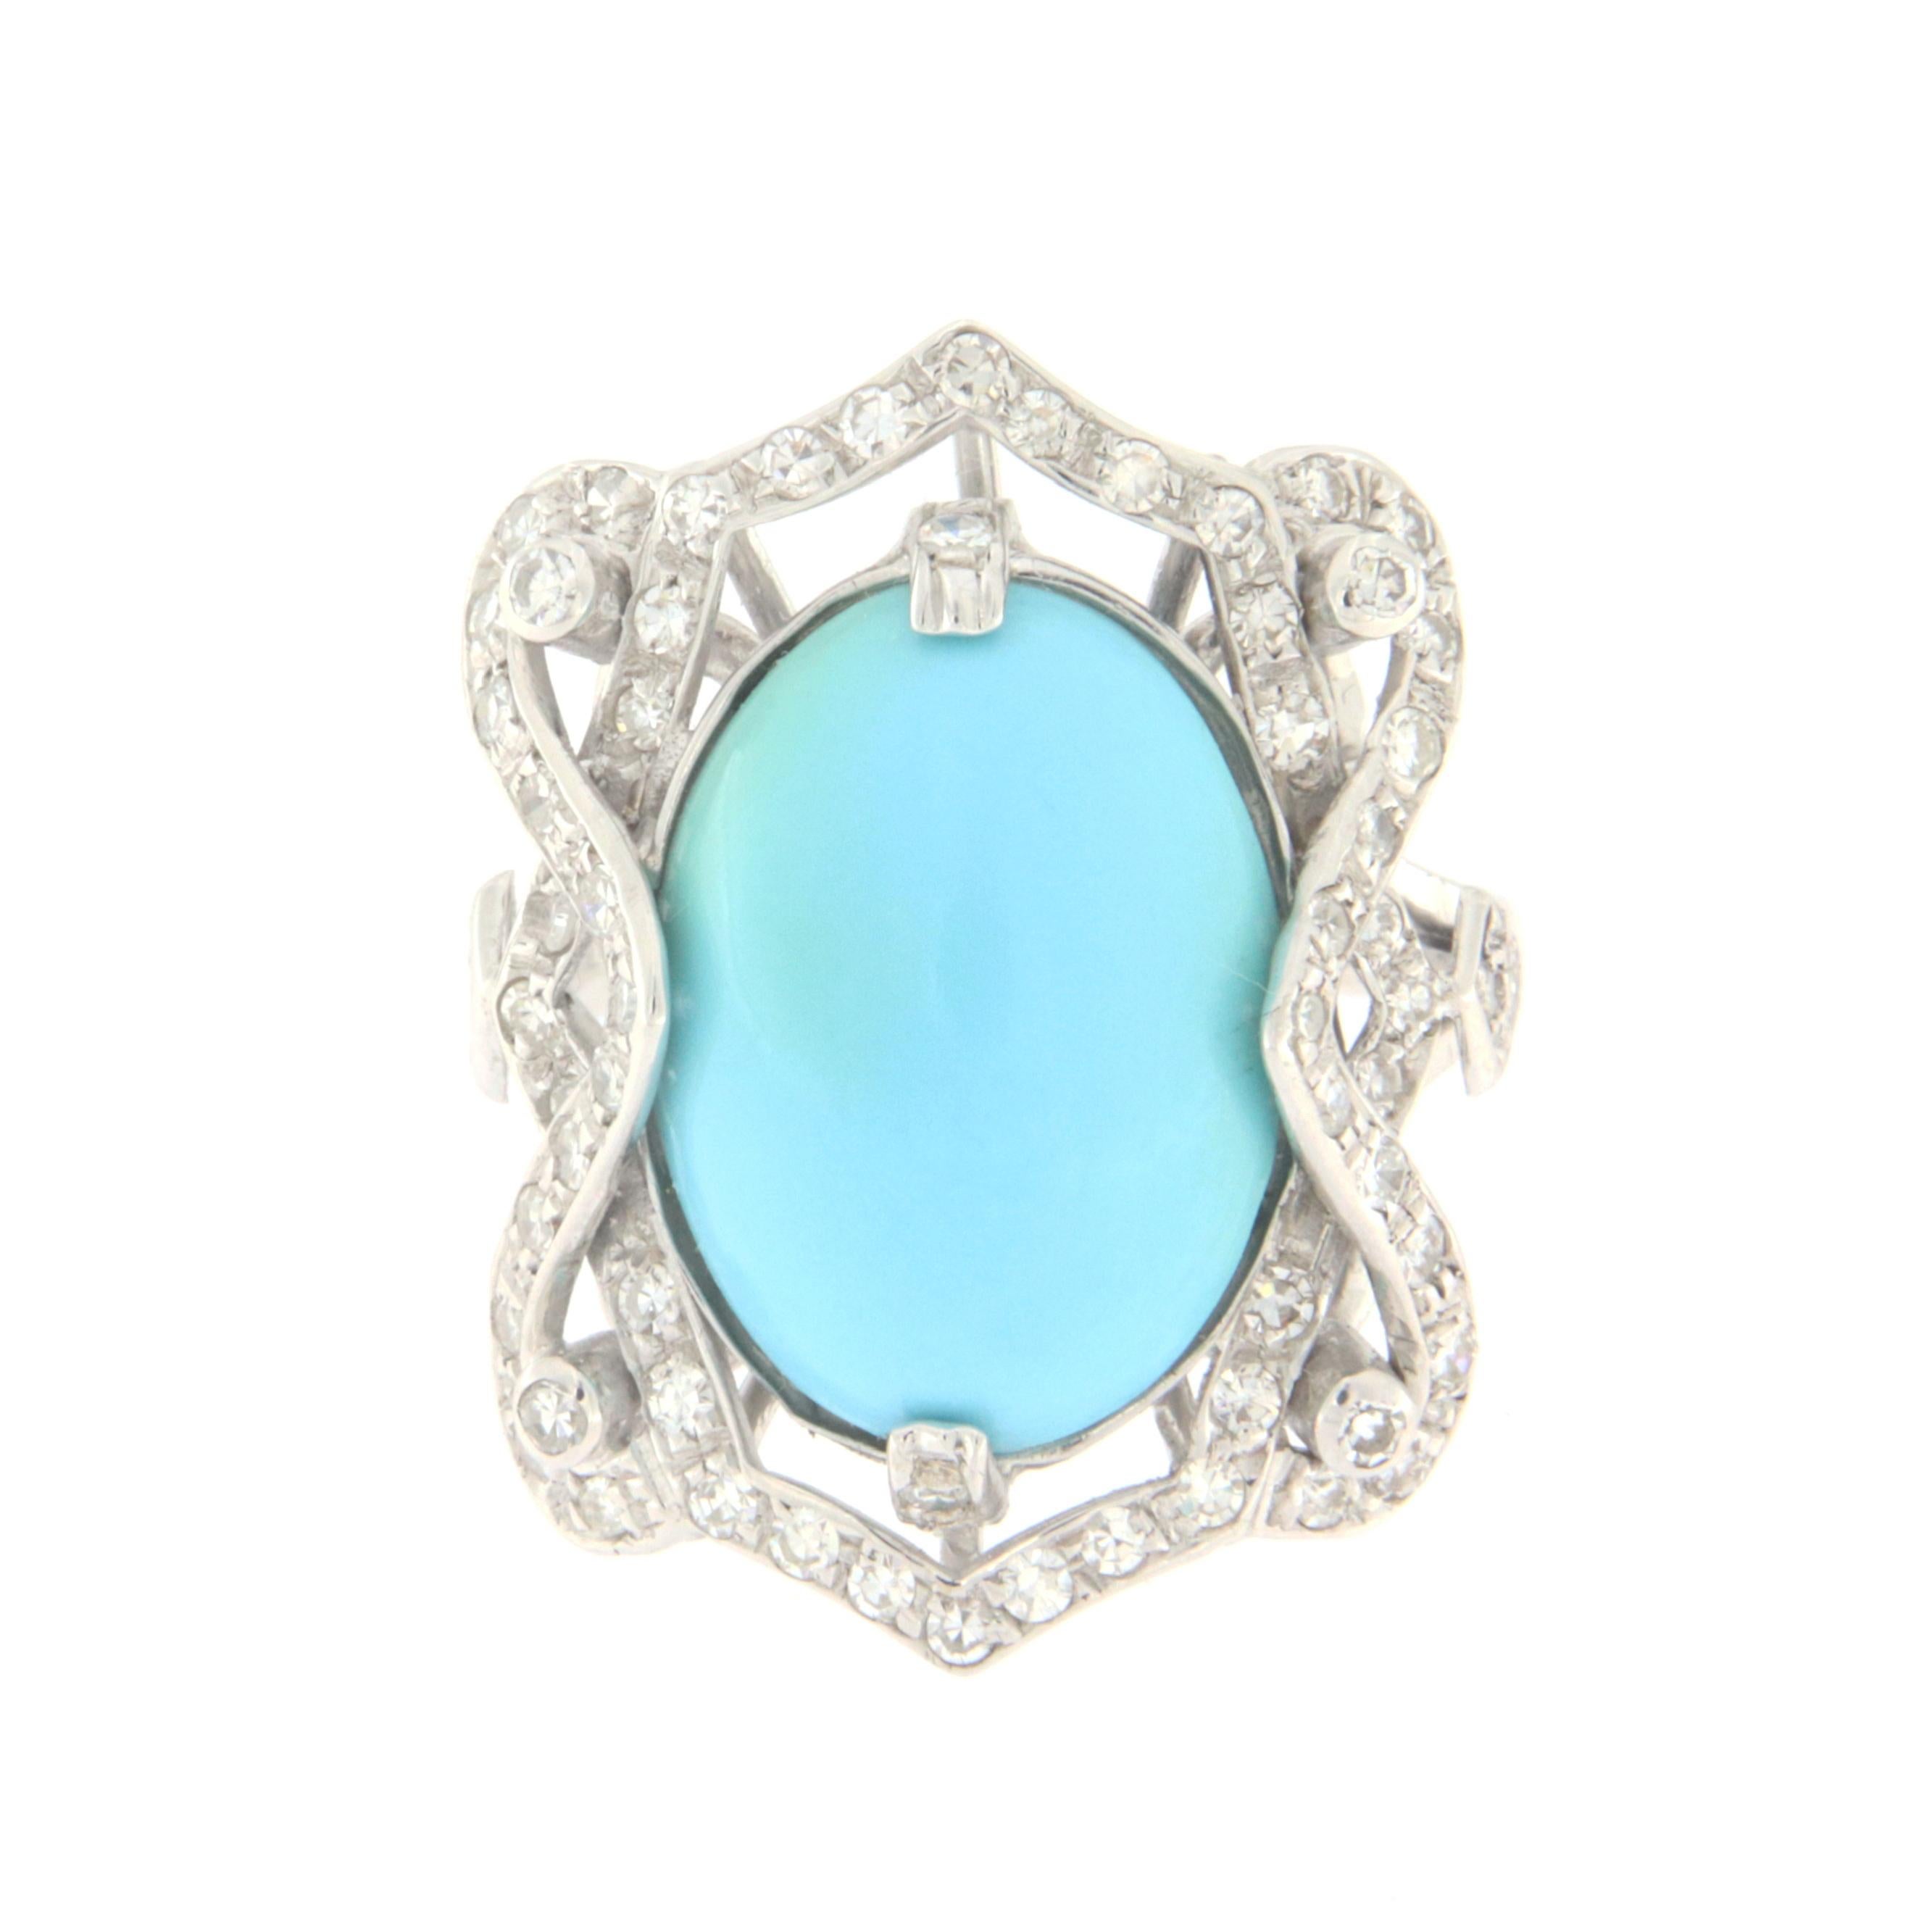 Fantastic ring made of 18 carat white gold with diamonds and natural turquoise, entirely handmade by expert craftsmen in the sector.
The turquoise present on the ring recalls the colors of the sea and evokes the arrival of summer, making it a jewel